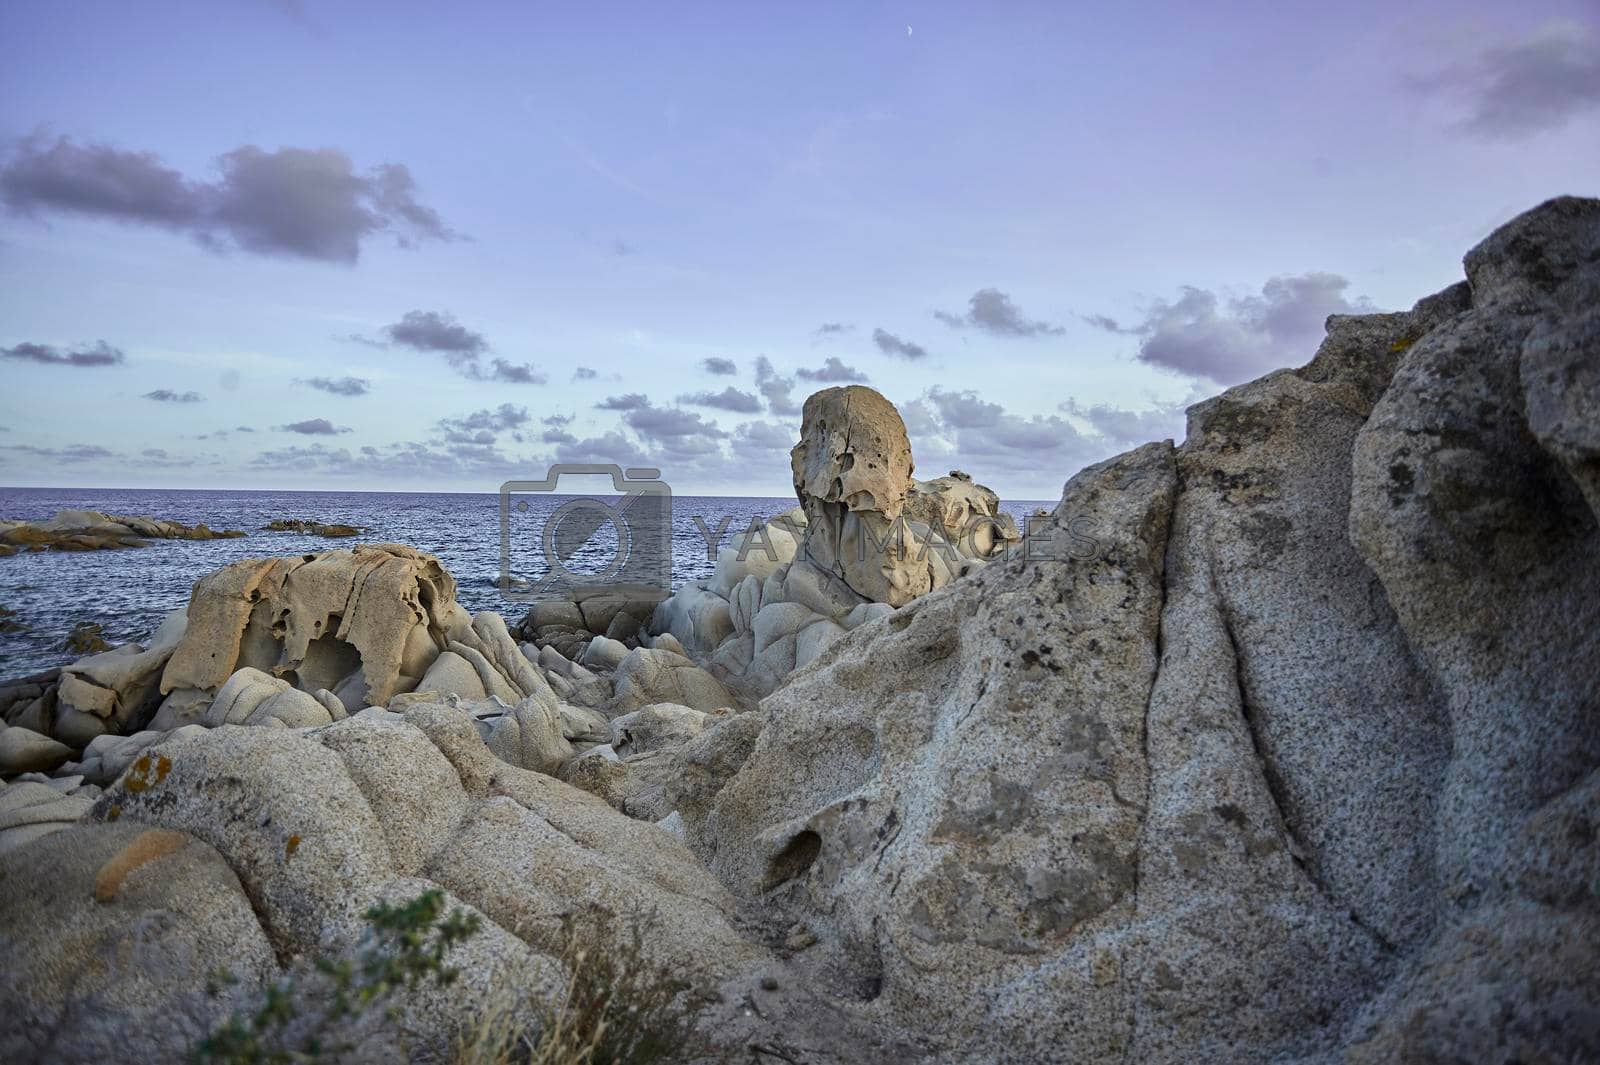 Royalty free image of Granite rocks on the coast by pippocarlot